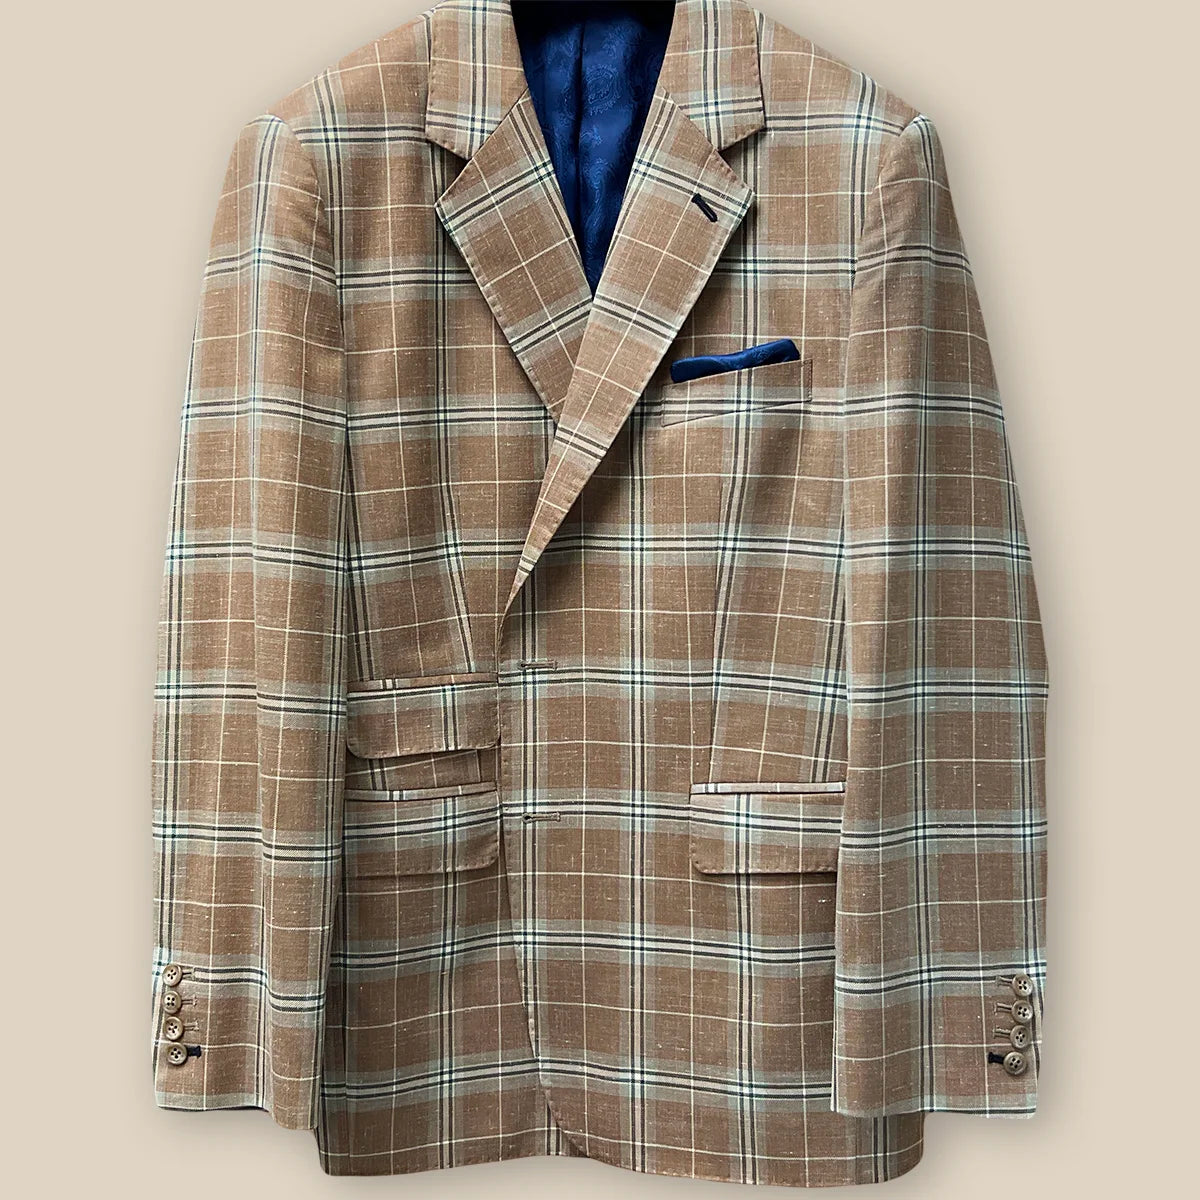 Buttonhole panel view on a brown beige men's sport coat with blanched almond and midnight blue windowpane pattern.